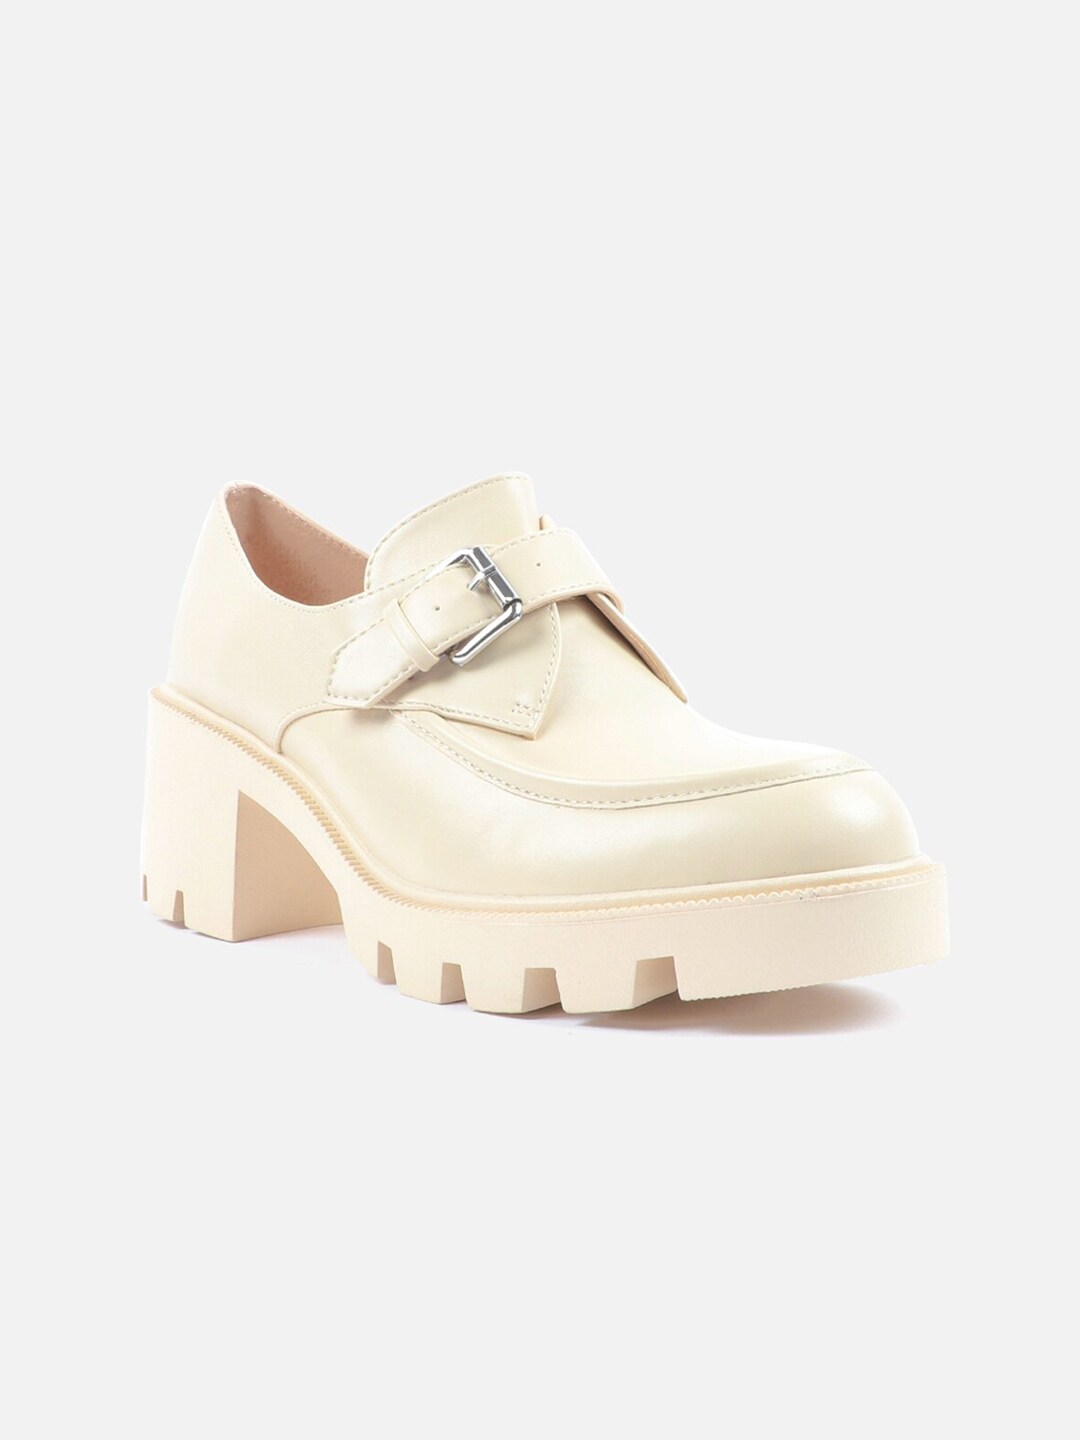 Carlton London Women Cream Solid Synthetic Patent Velcro Block Slip-On Sneakers Price in India